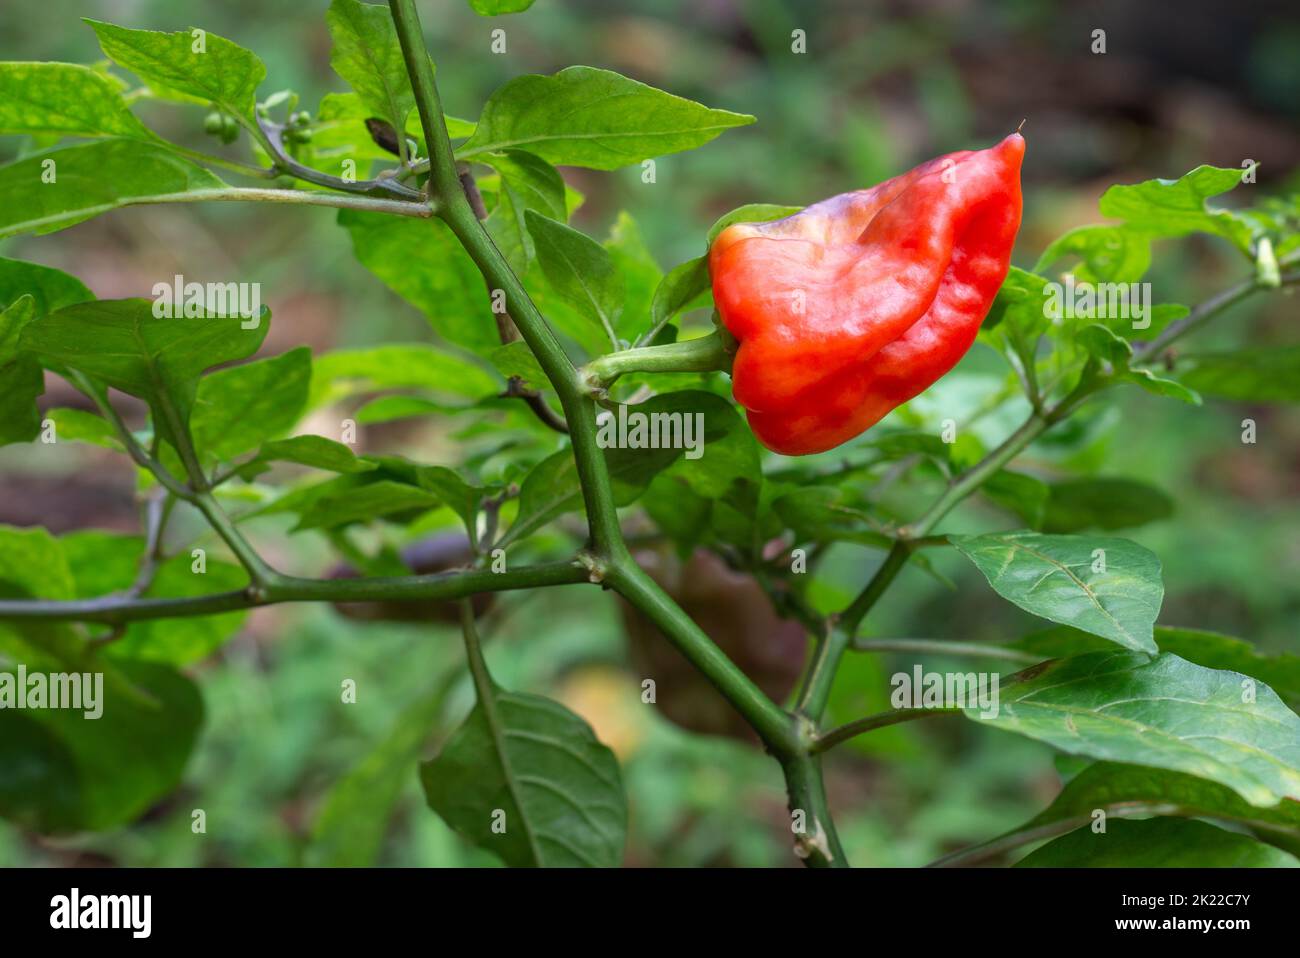 chilli plant with red ripe fruit, isolated on green natural garden background, common spicy vegetable used for their spicy taste, soft-focus Stock Photo